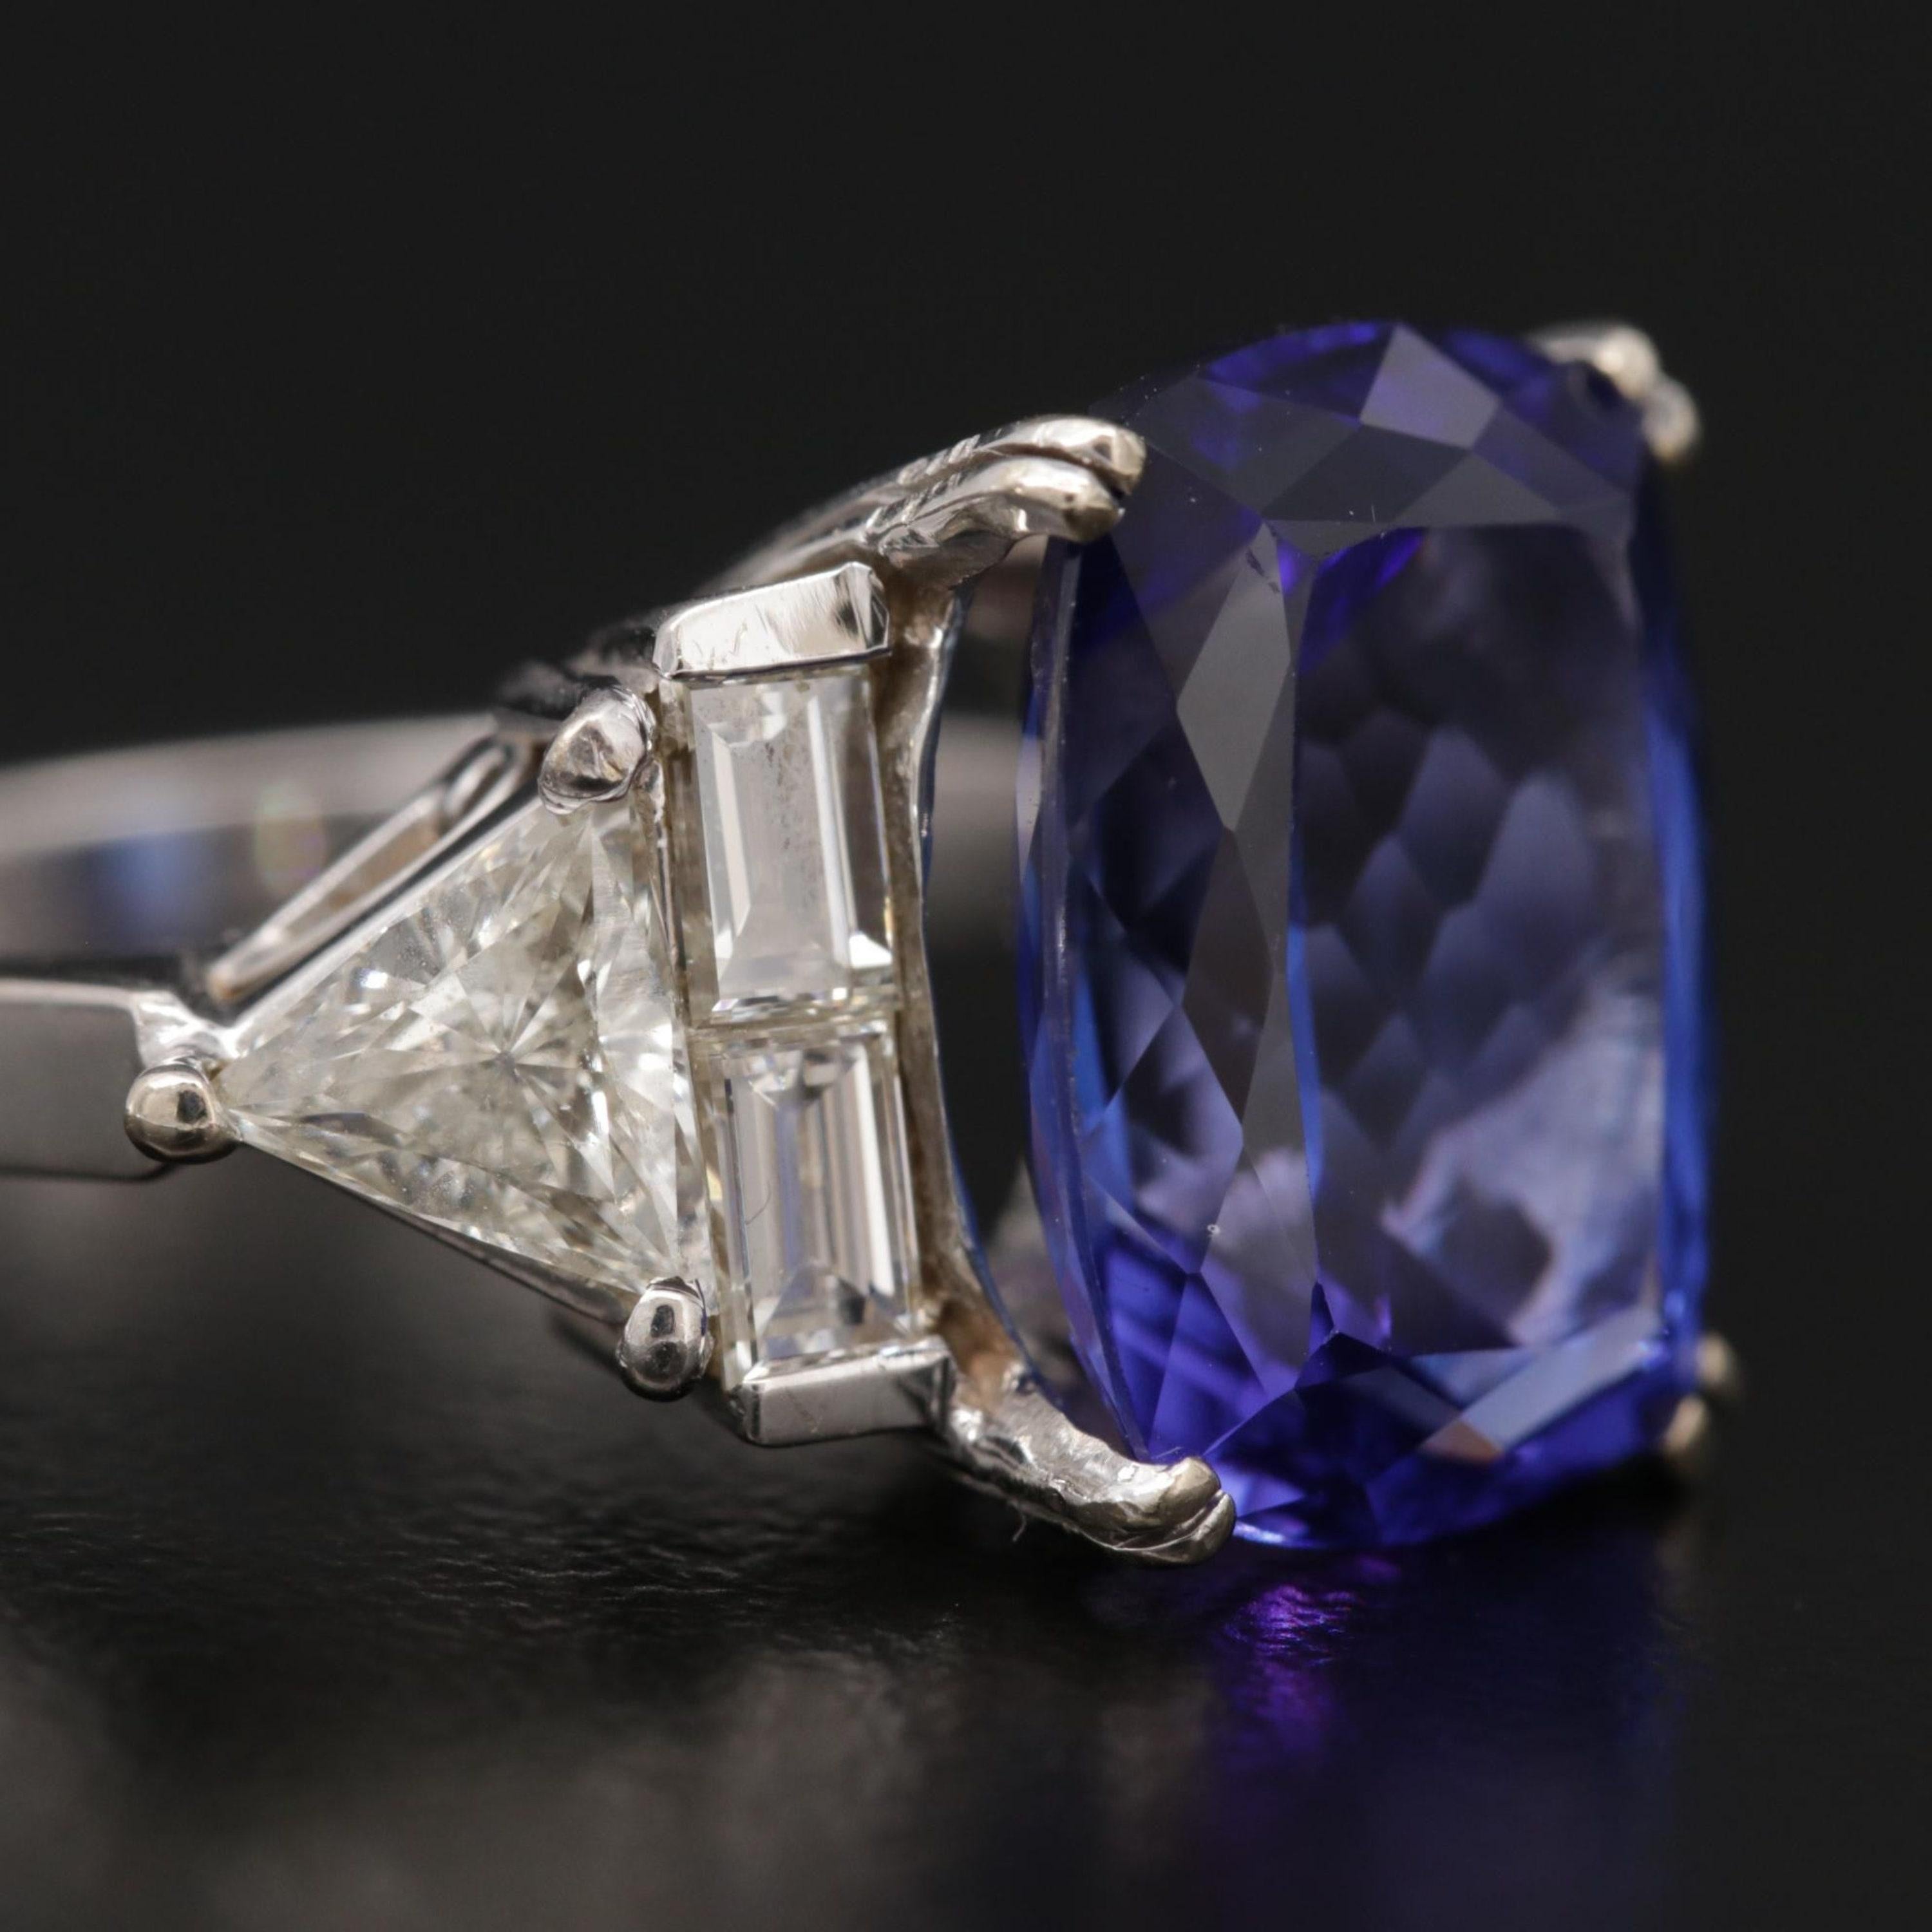 For Sale:  4 Carat Natural Sapphire Diamond Engagement Ring Set in 18K Gold, Cocktail Ring 5